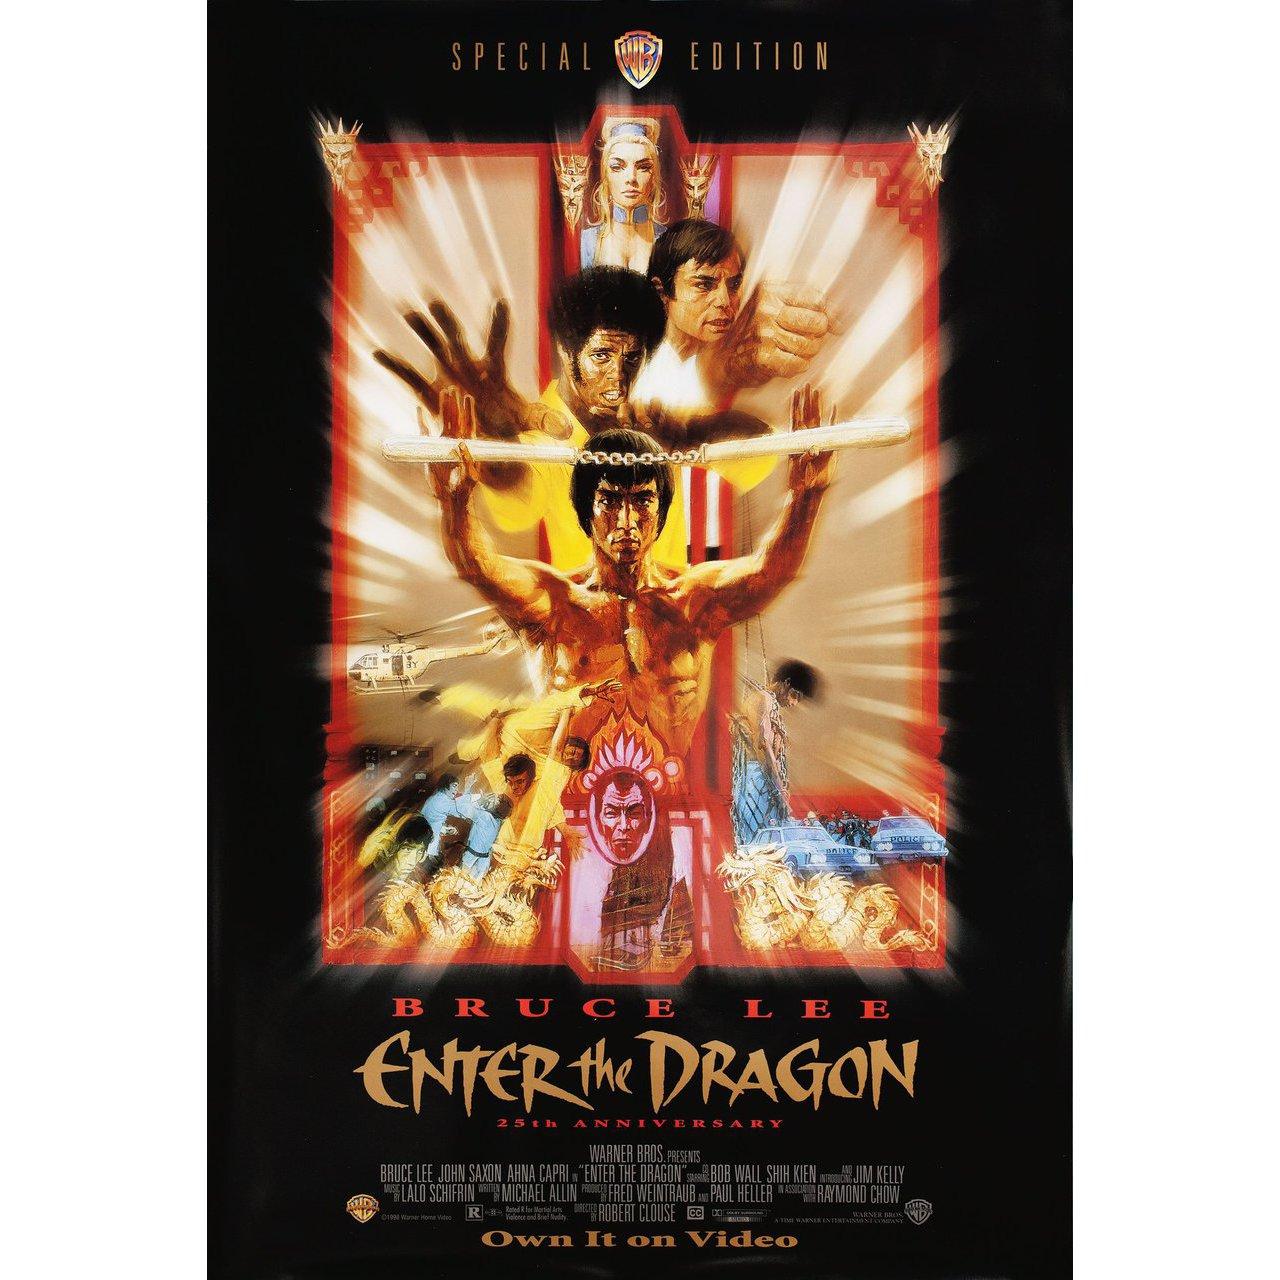 Original 1997 re-release U.S. one sheet poster for the 1973 film Enter the Dragon directed by Robert Clouse with Bruce Lee / John Saxon / Jim Kelly / Ahna Capri. Very good-fine condition, rolled. Please note: the size is stated in inches and the